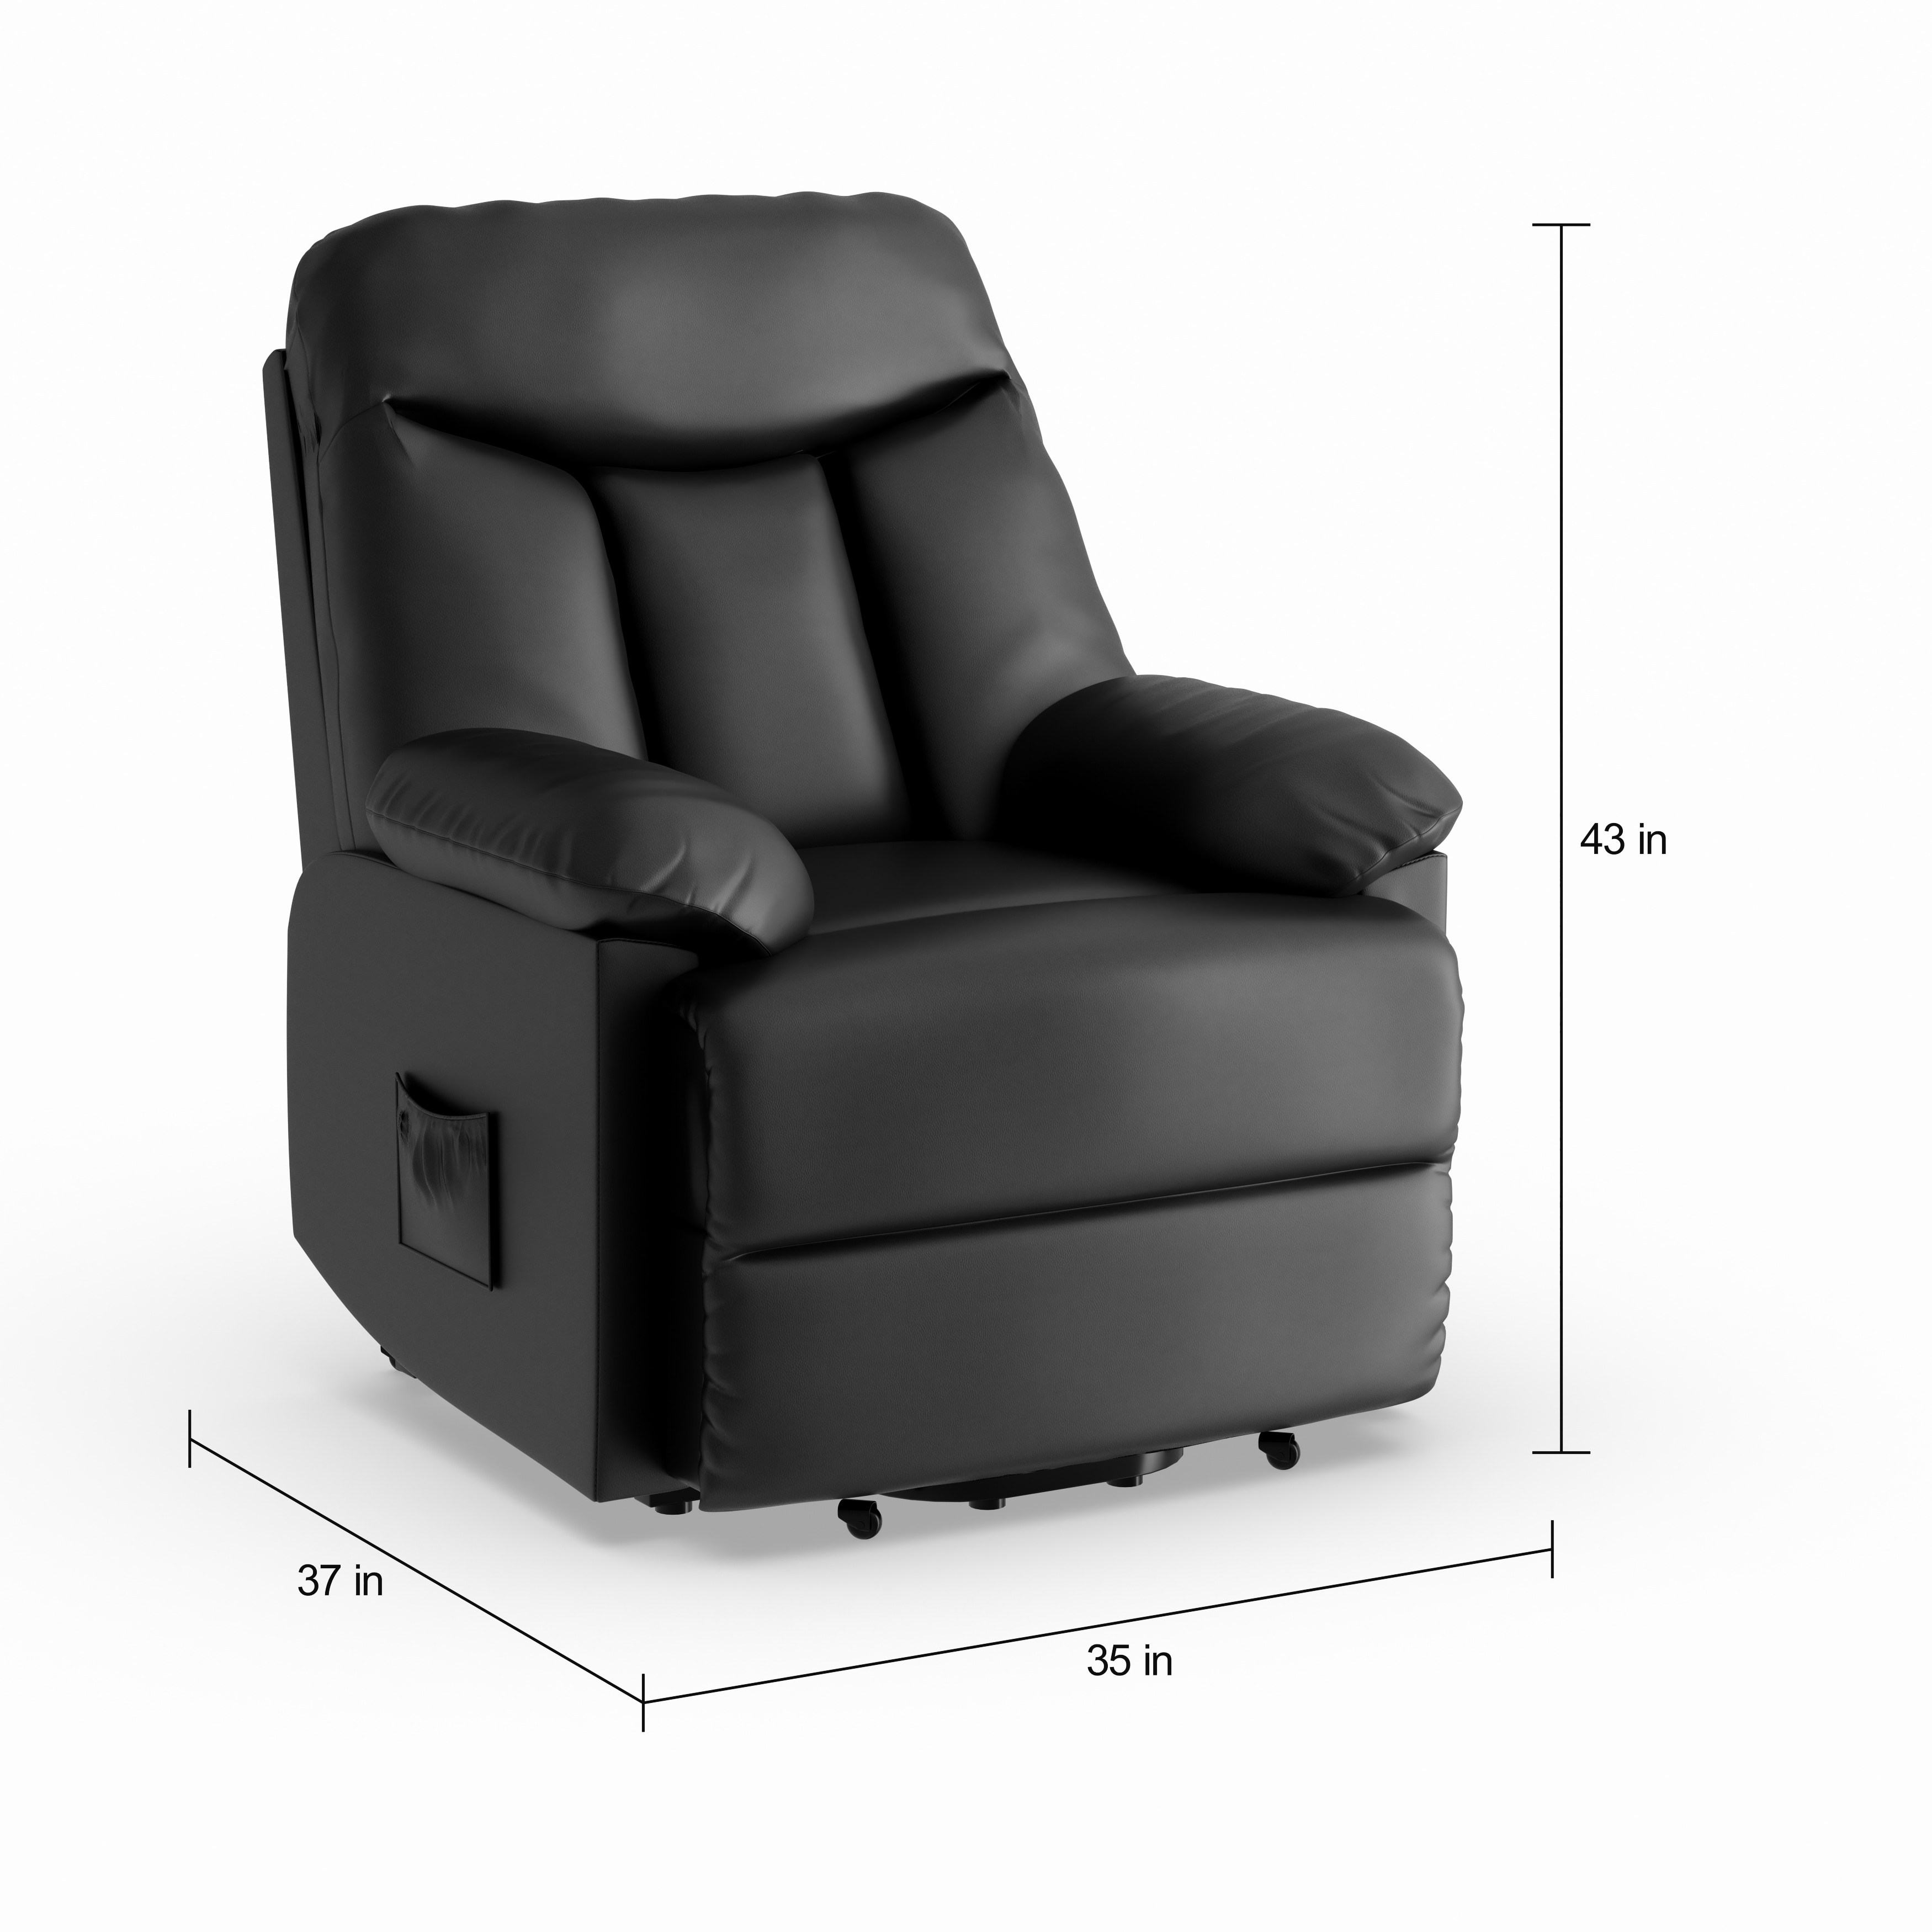 Modern Lift Chair Recliner Medicare for Large Space